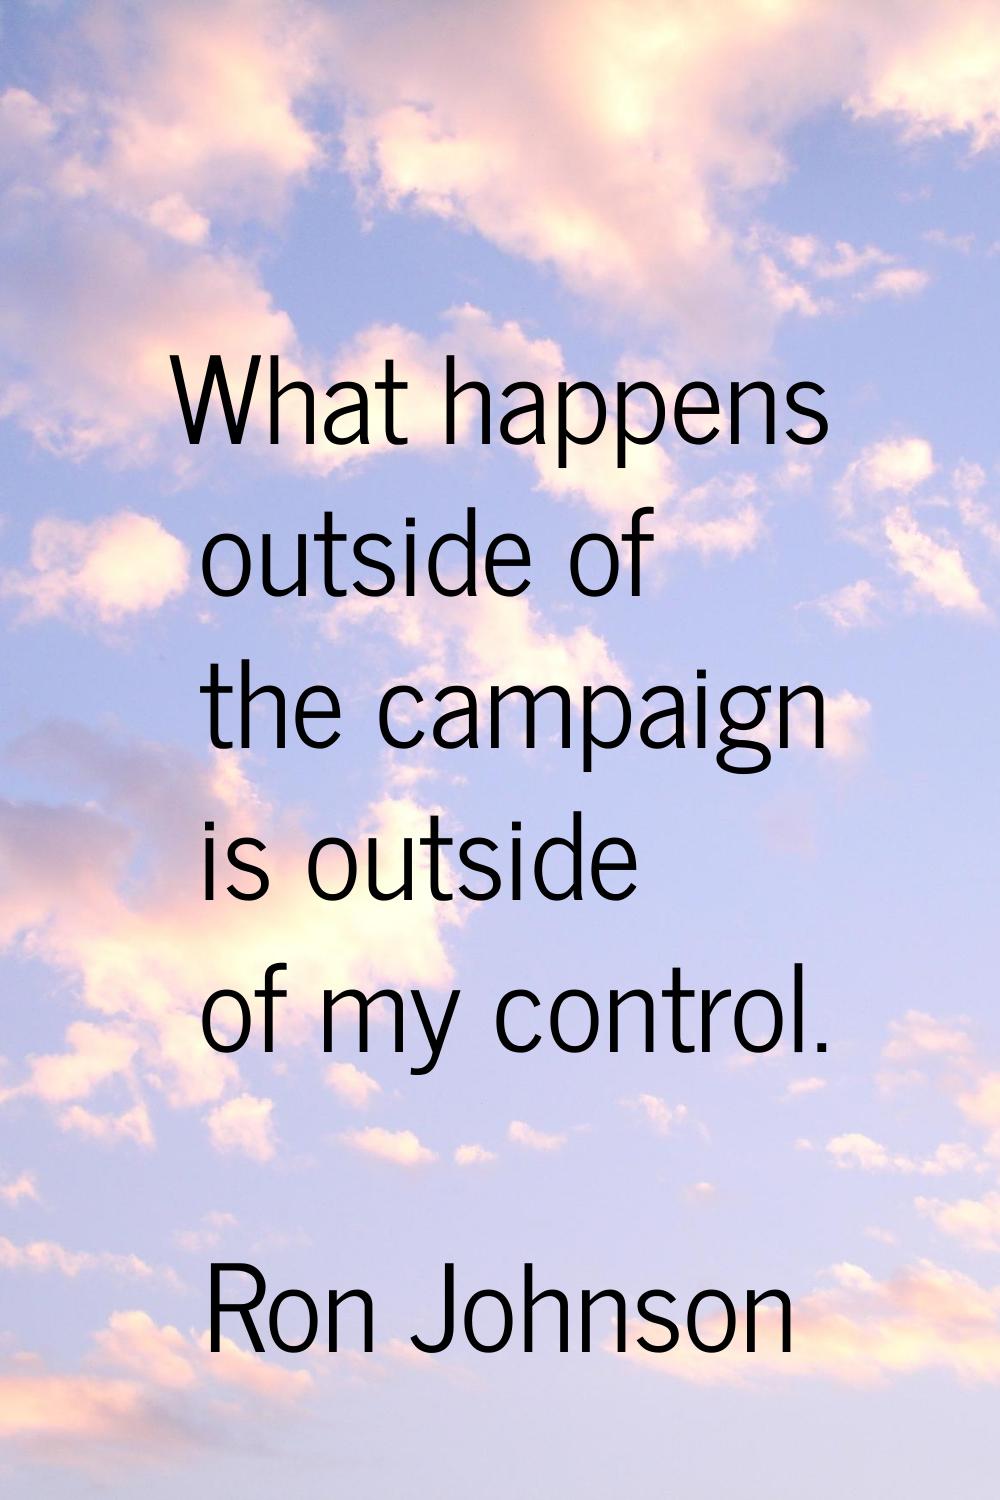 What happens outside of the campaign is outside of my control.